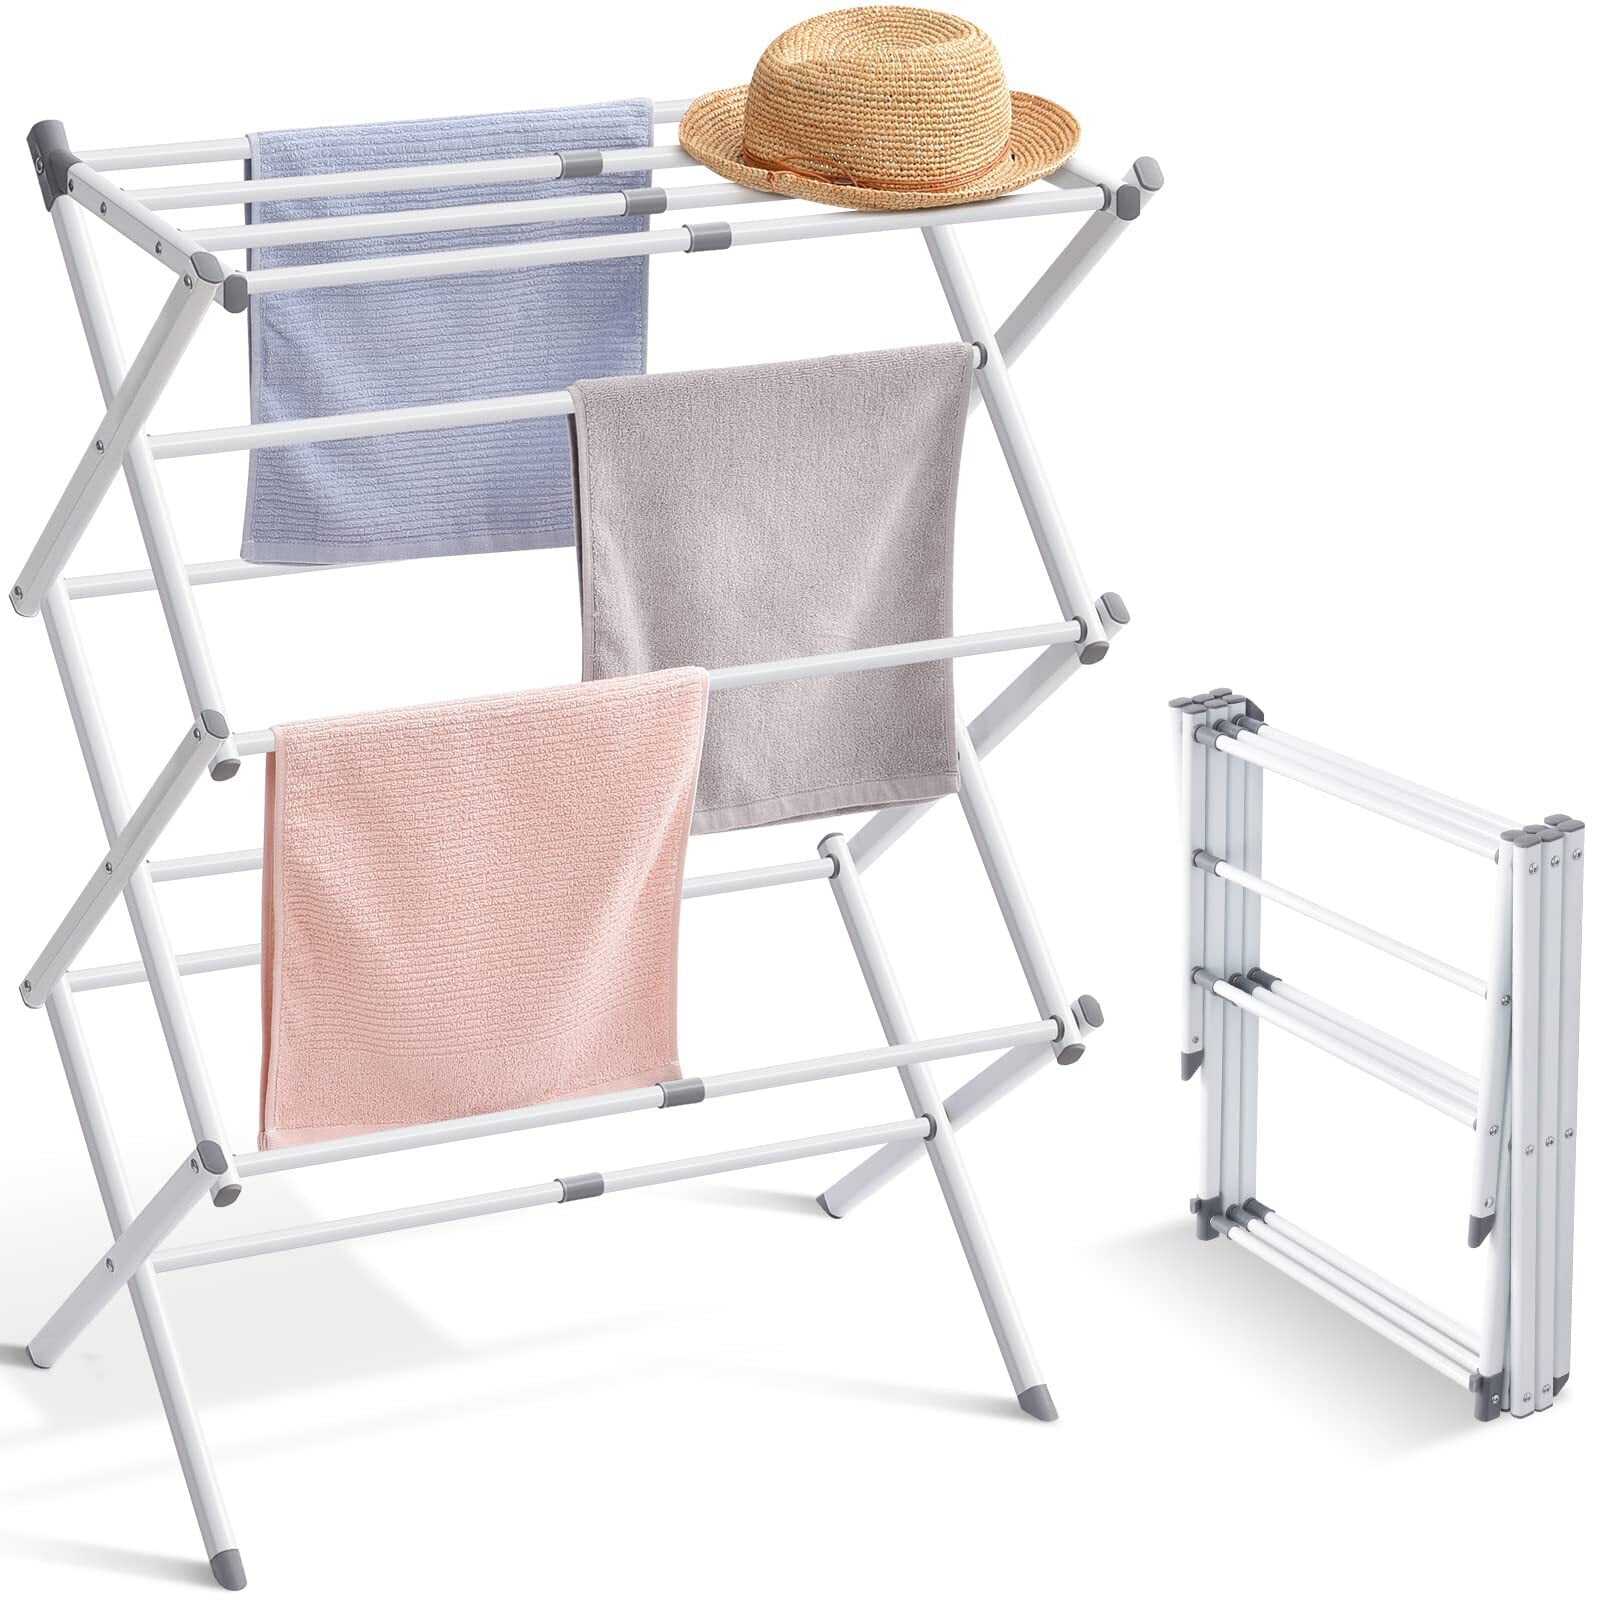 Giantex Foldable Clothes Drying Rack, Oversized 4-Tier Collapsible Laundry  Rack w/ 3 Retractable Trays, Hanger Holders, Moveable Laundry Garment Dryer